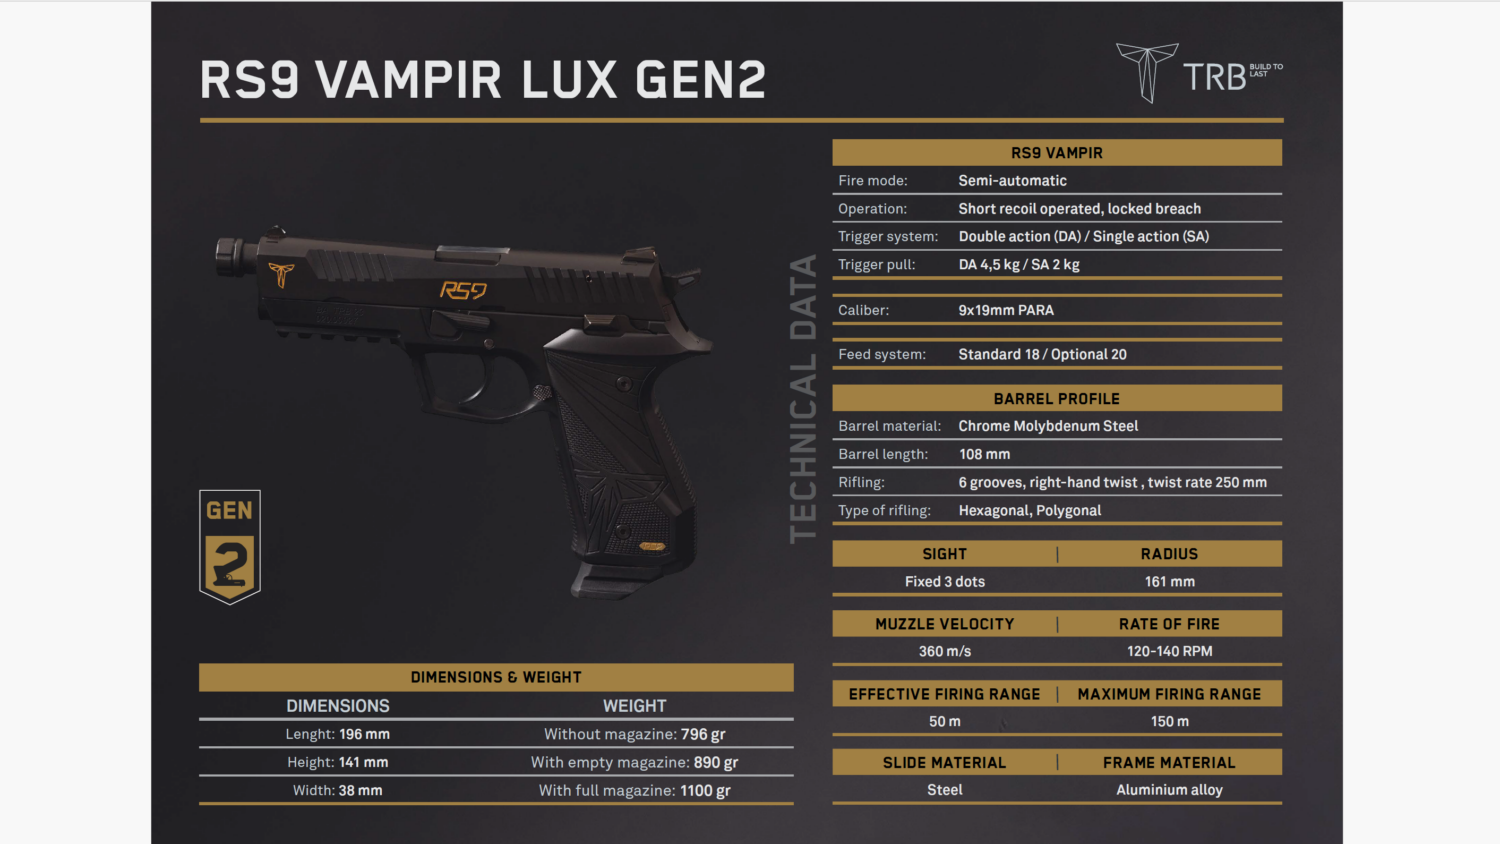 Specifications of RS 9 Vampir LUX Gen2. Photo from the TRB catalogue.